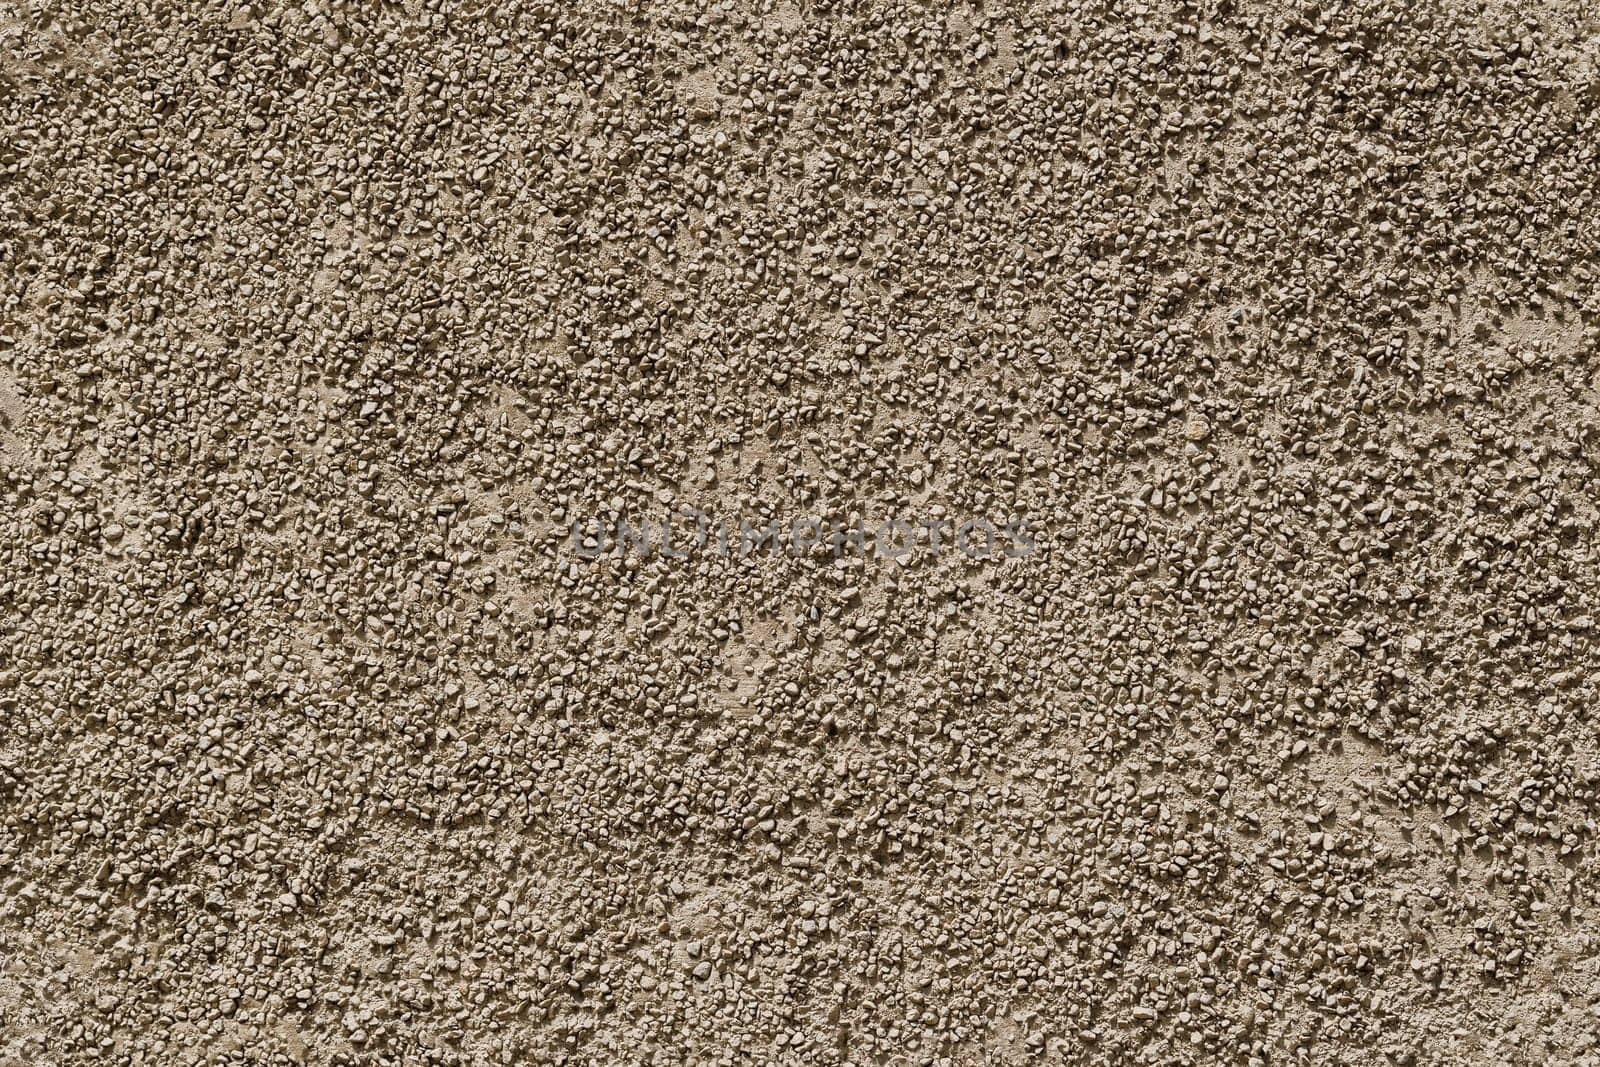 small gravel stucco wall finish seamless texture and full-frame background.